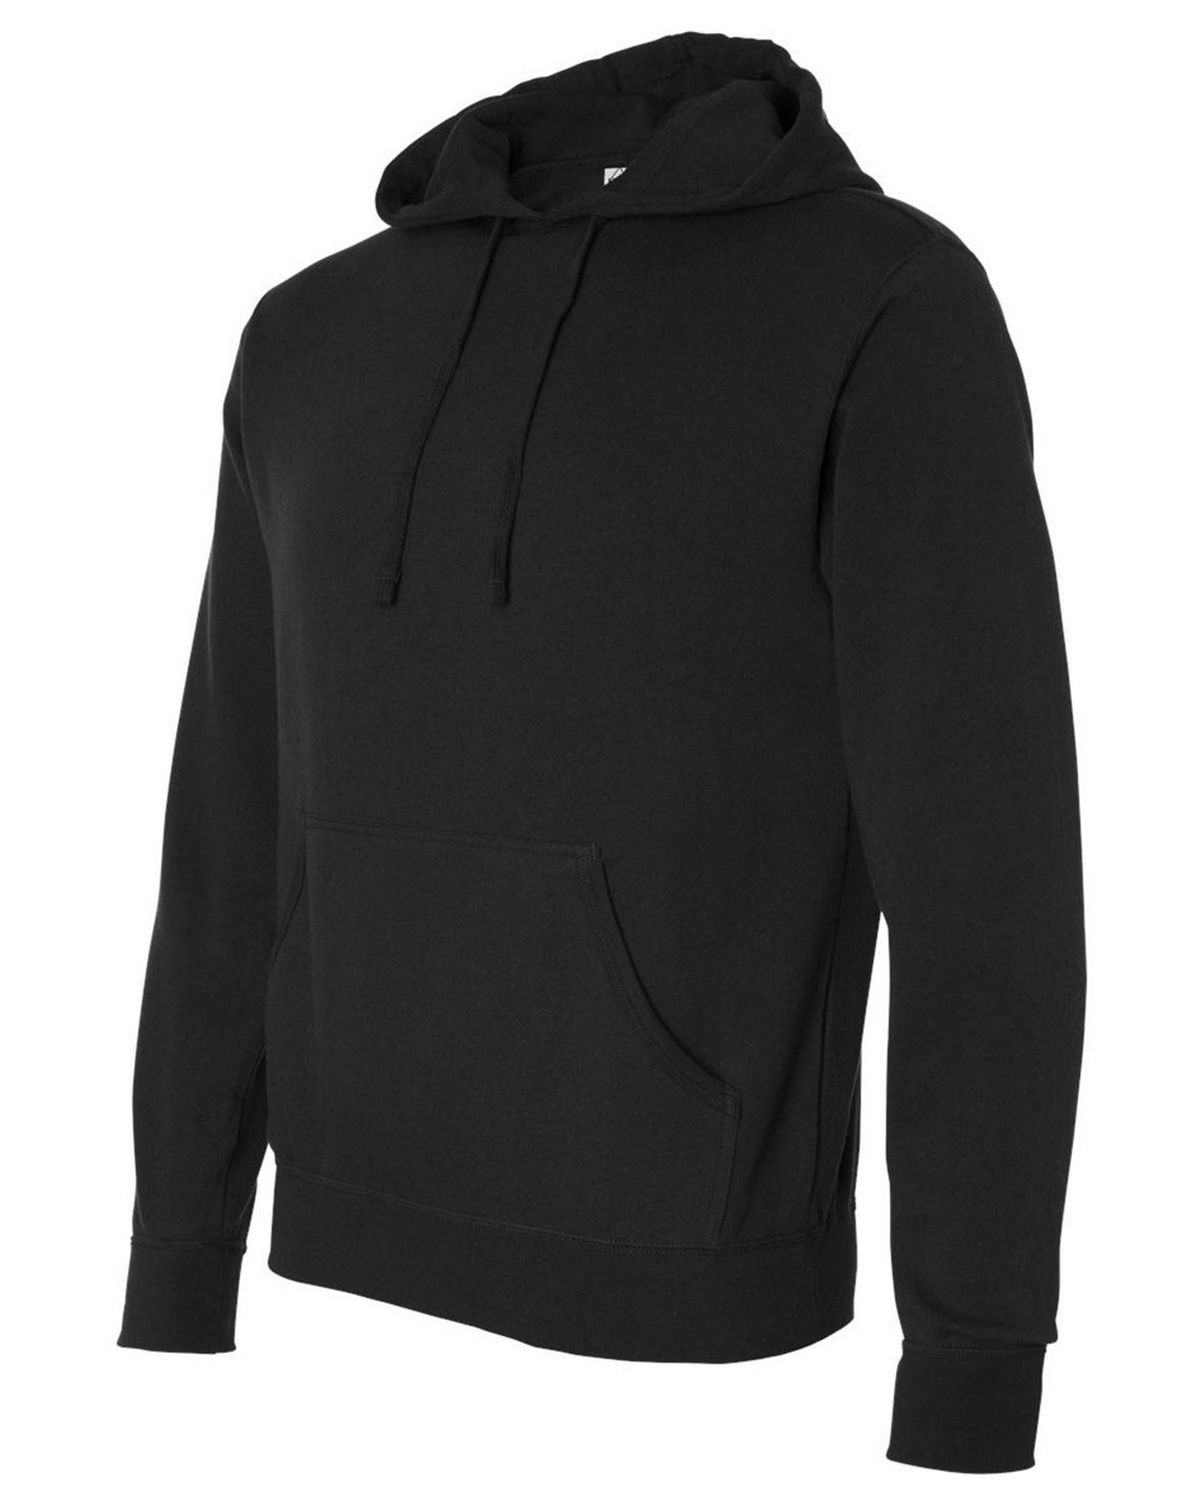 Size Chart for Independent Trading Co. AFX4000 Mens Hooded Pullover ...